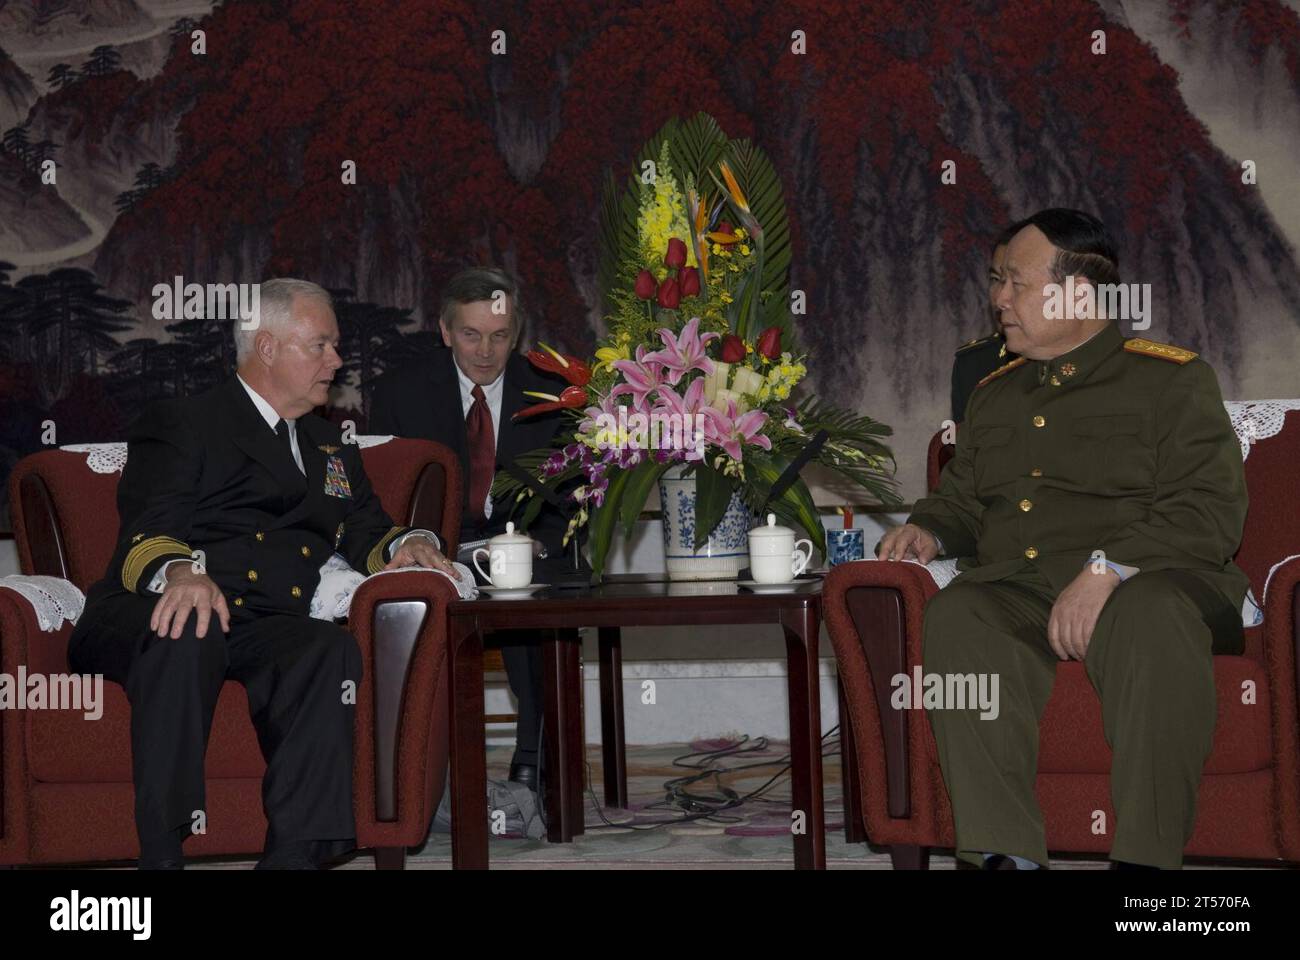 US Navy Adm. Timothy J. Keating, commander of U.S. Pacific Command, and Gen. Guo Boxiong, vice chairman Stock Photo